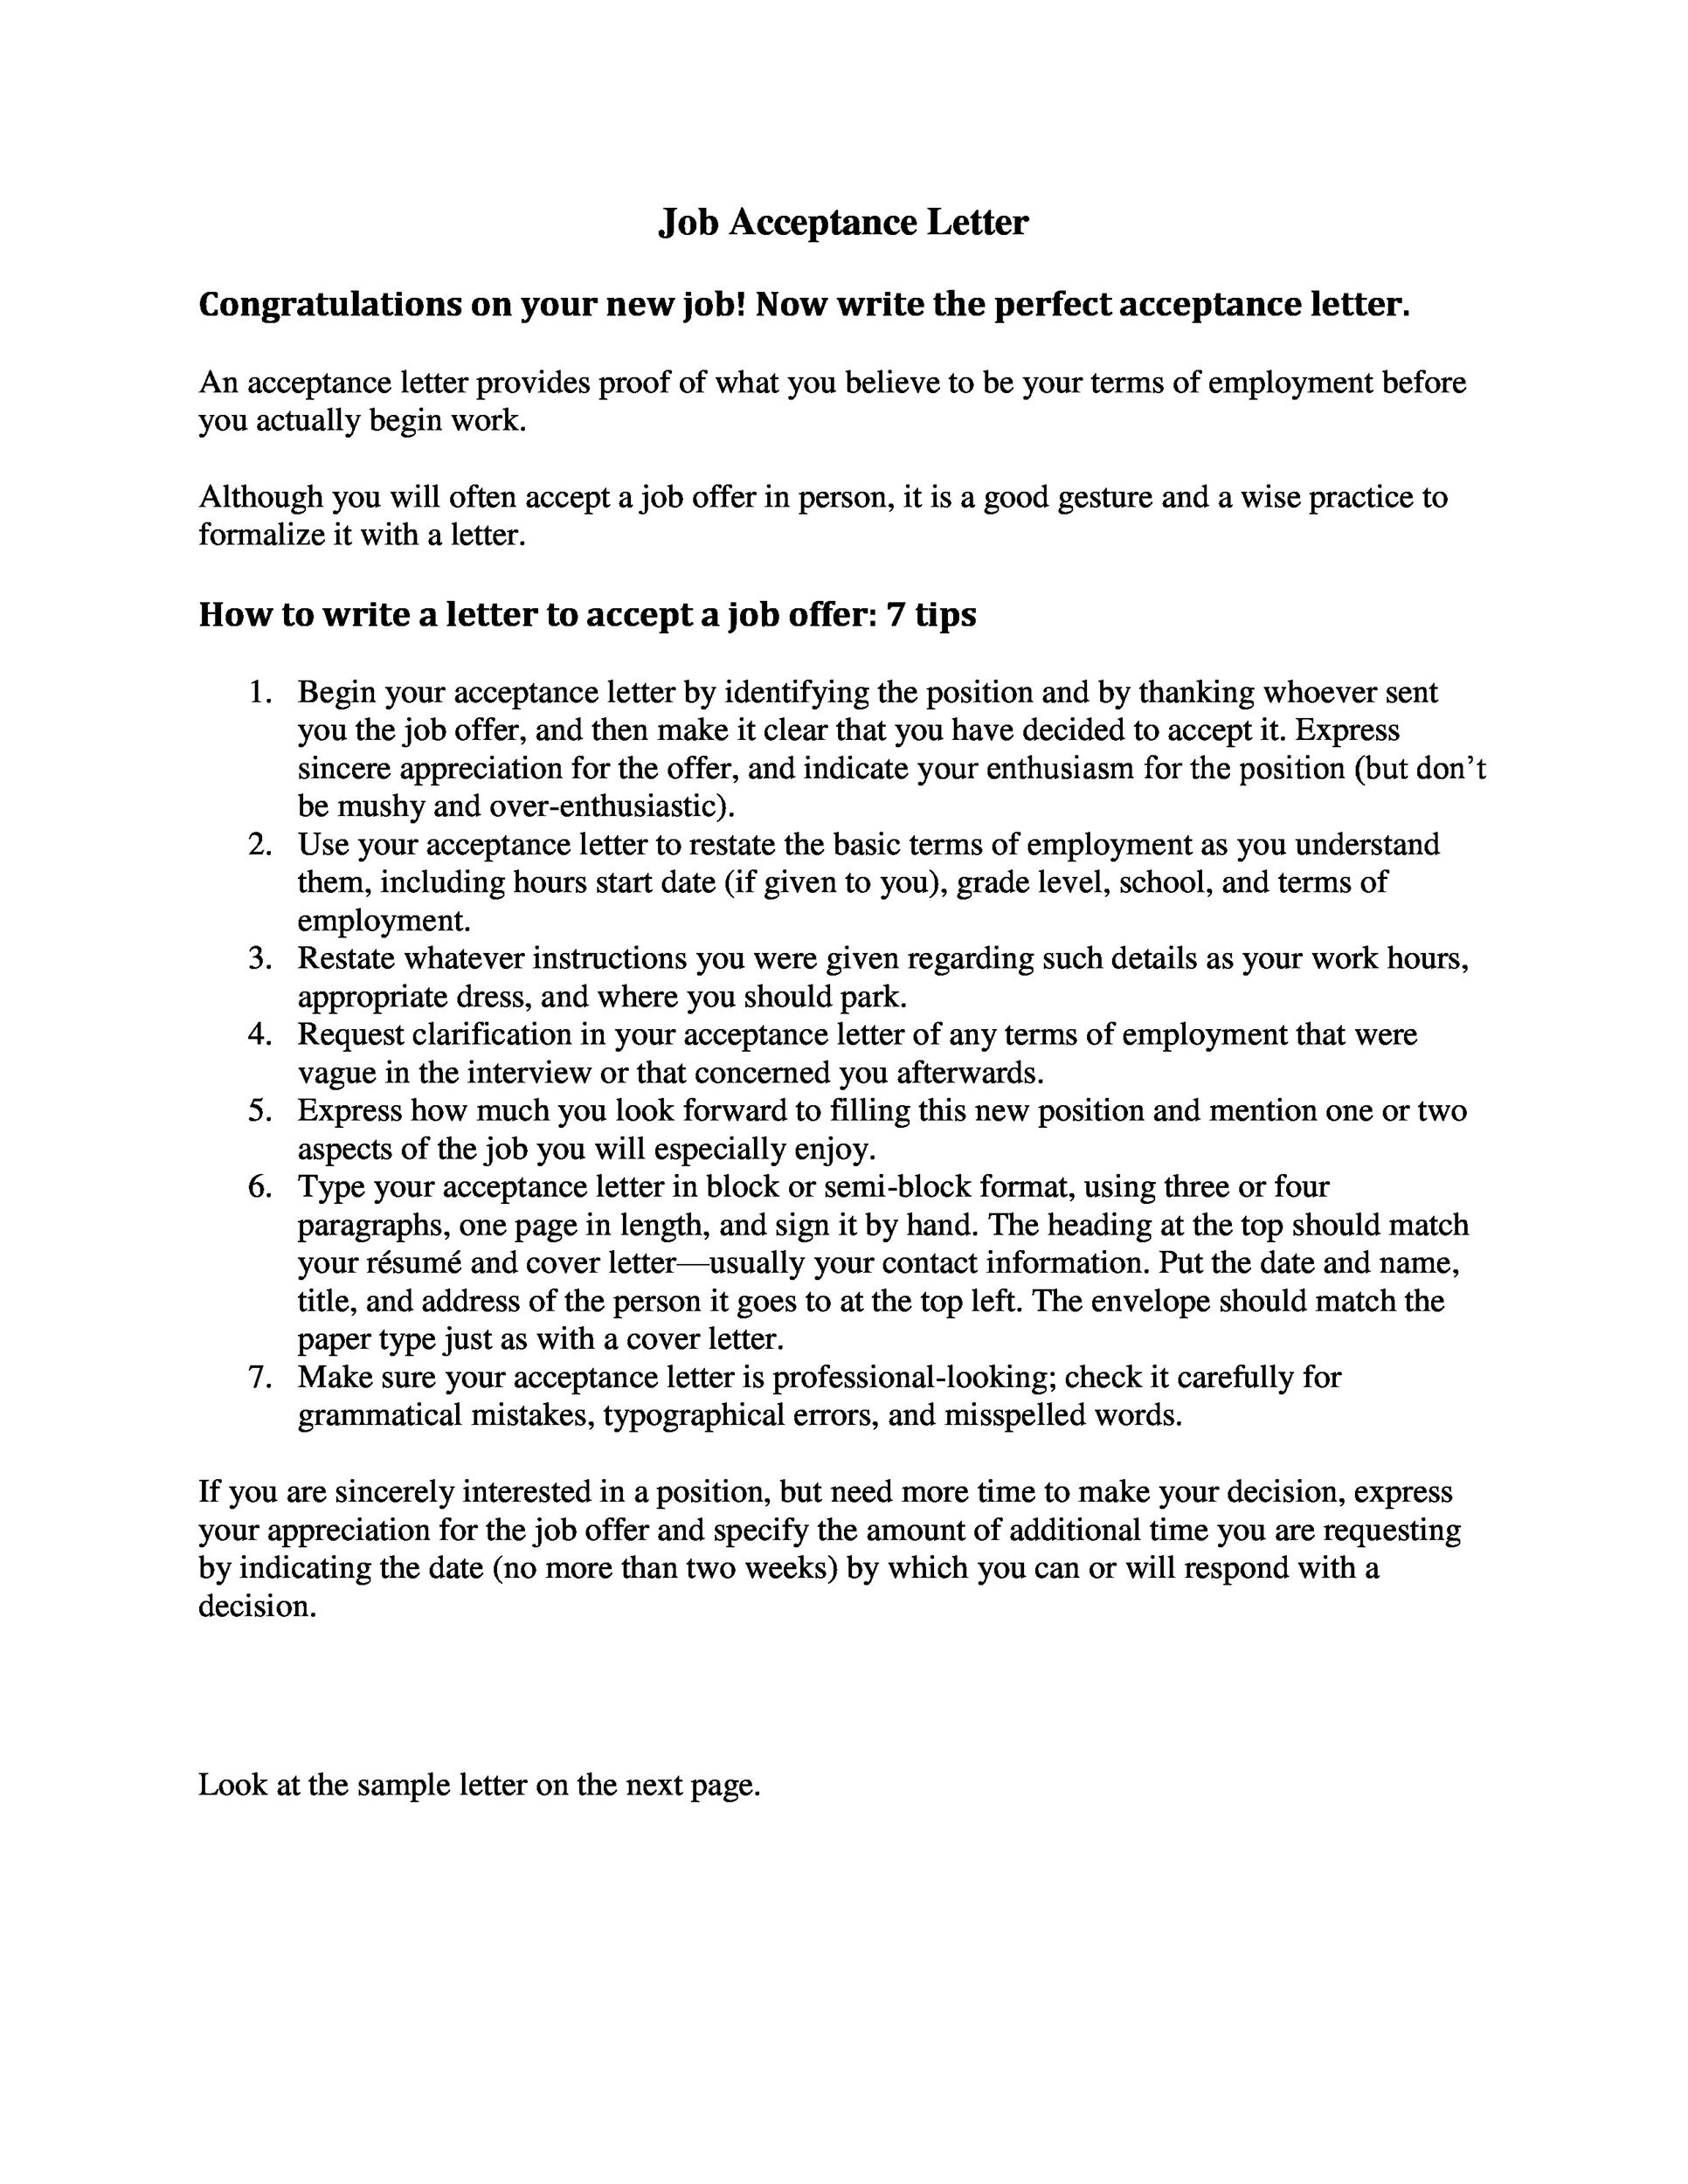 How to reply to a job offer letter via email 